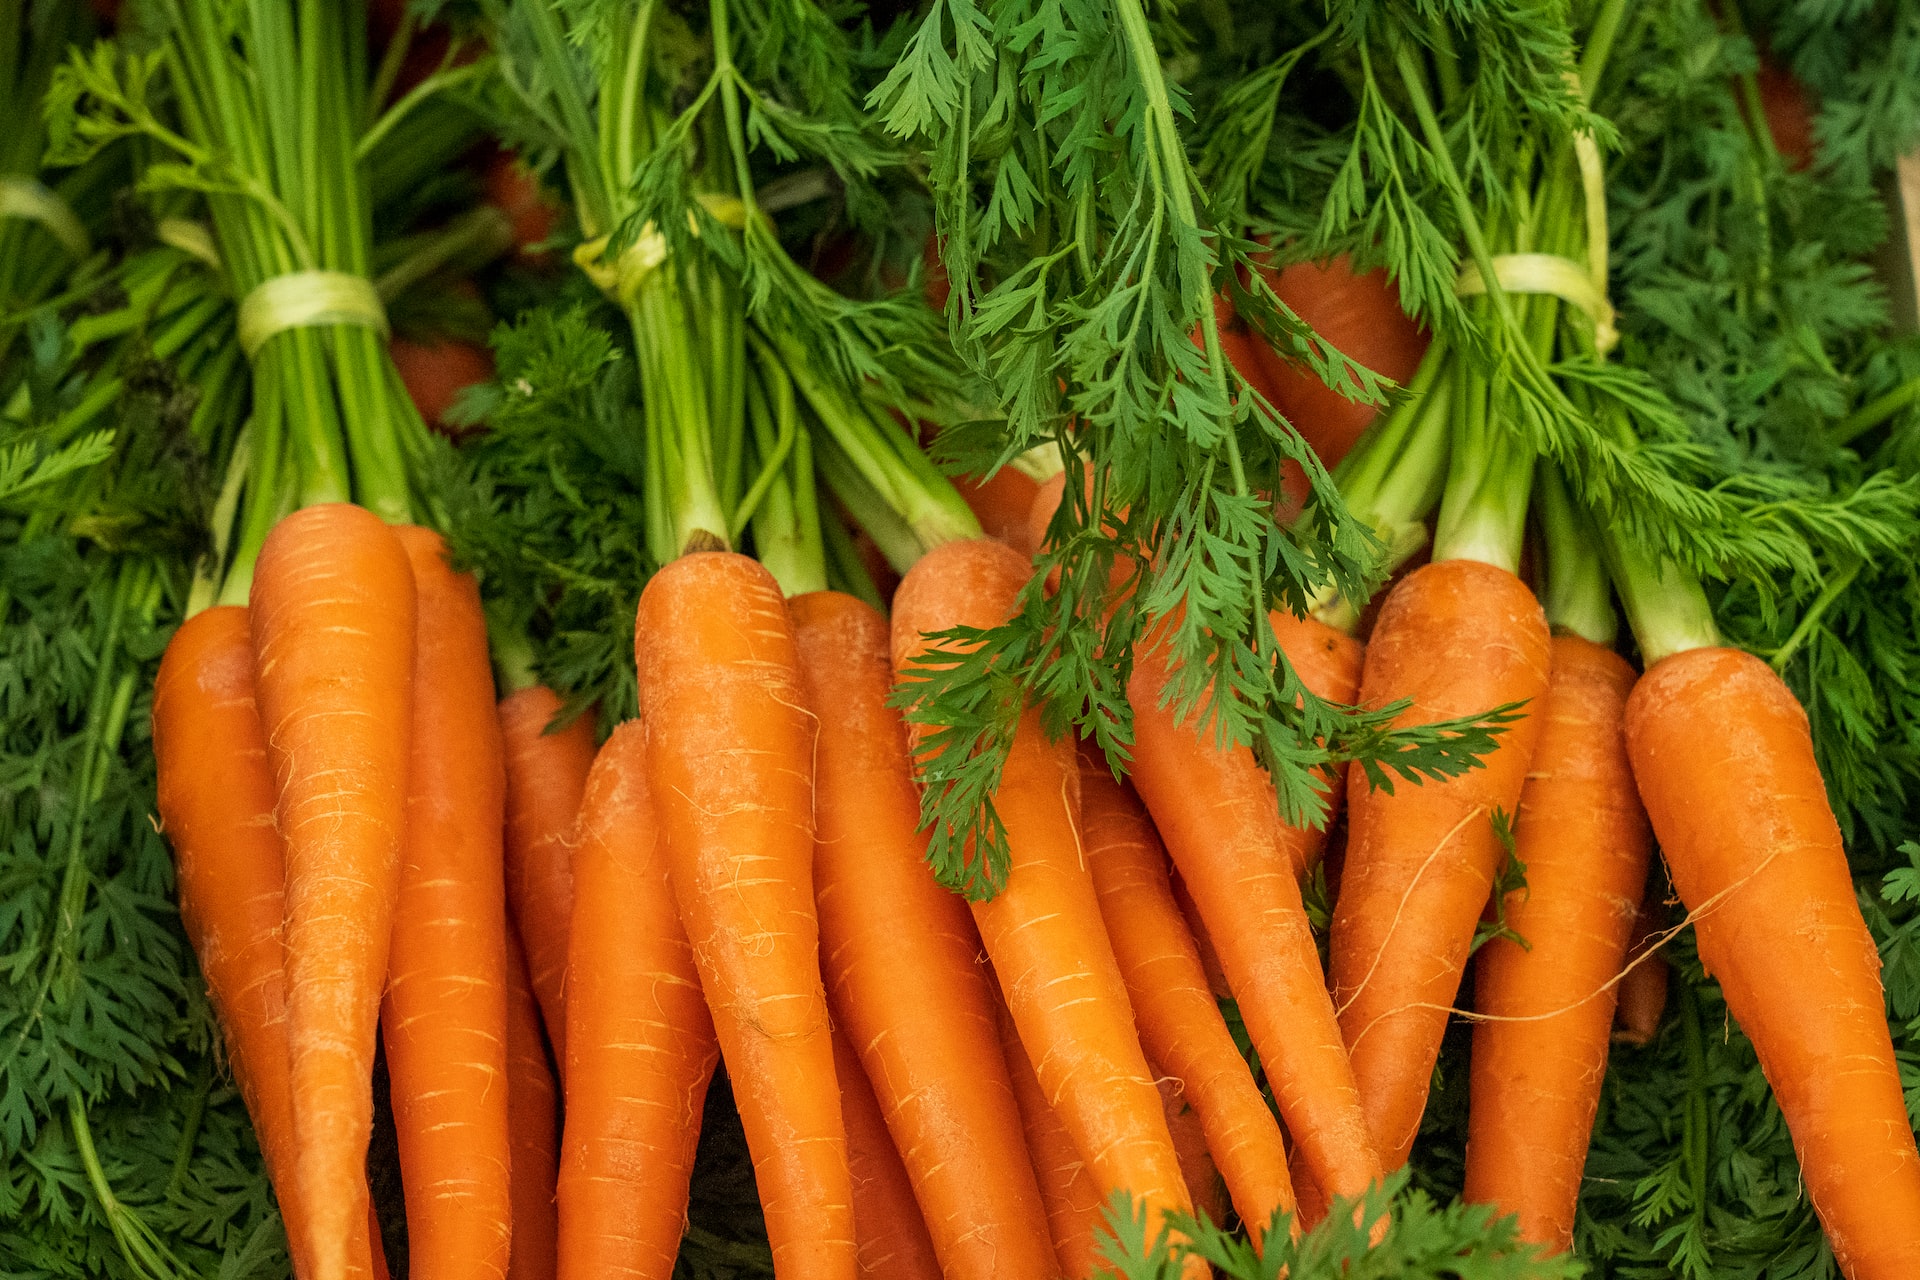 Can Dogs Eat Carrots? Read before you feed!